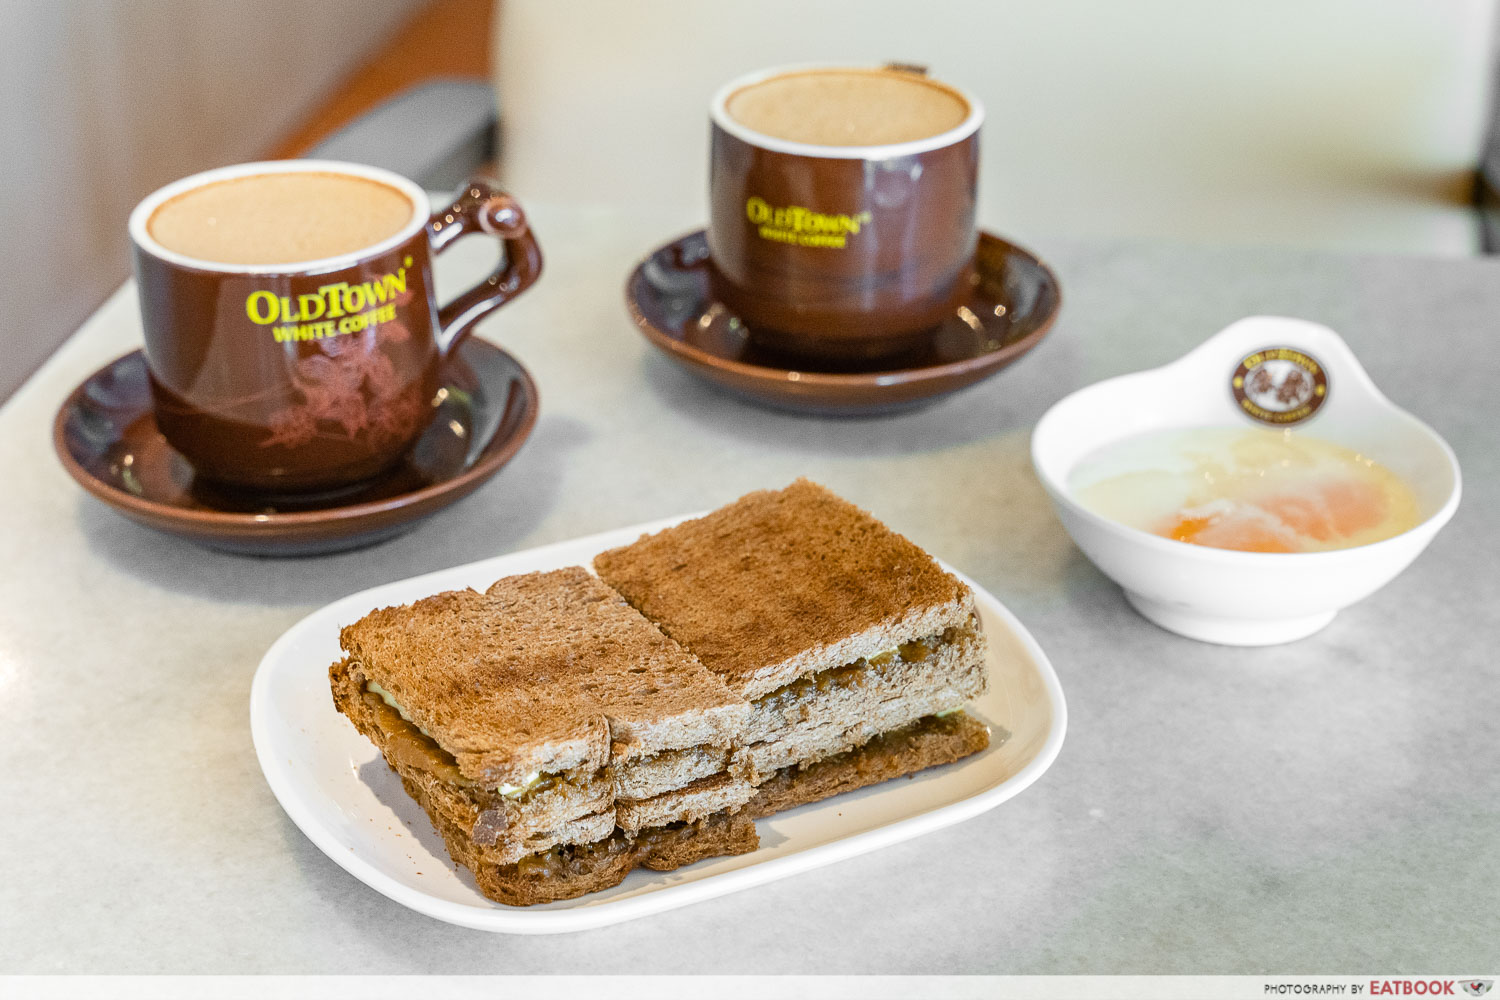 kallang wave mall - oldtown white coffee